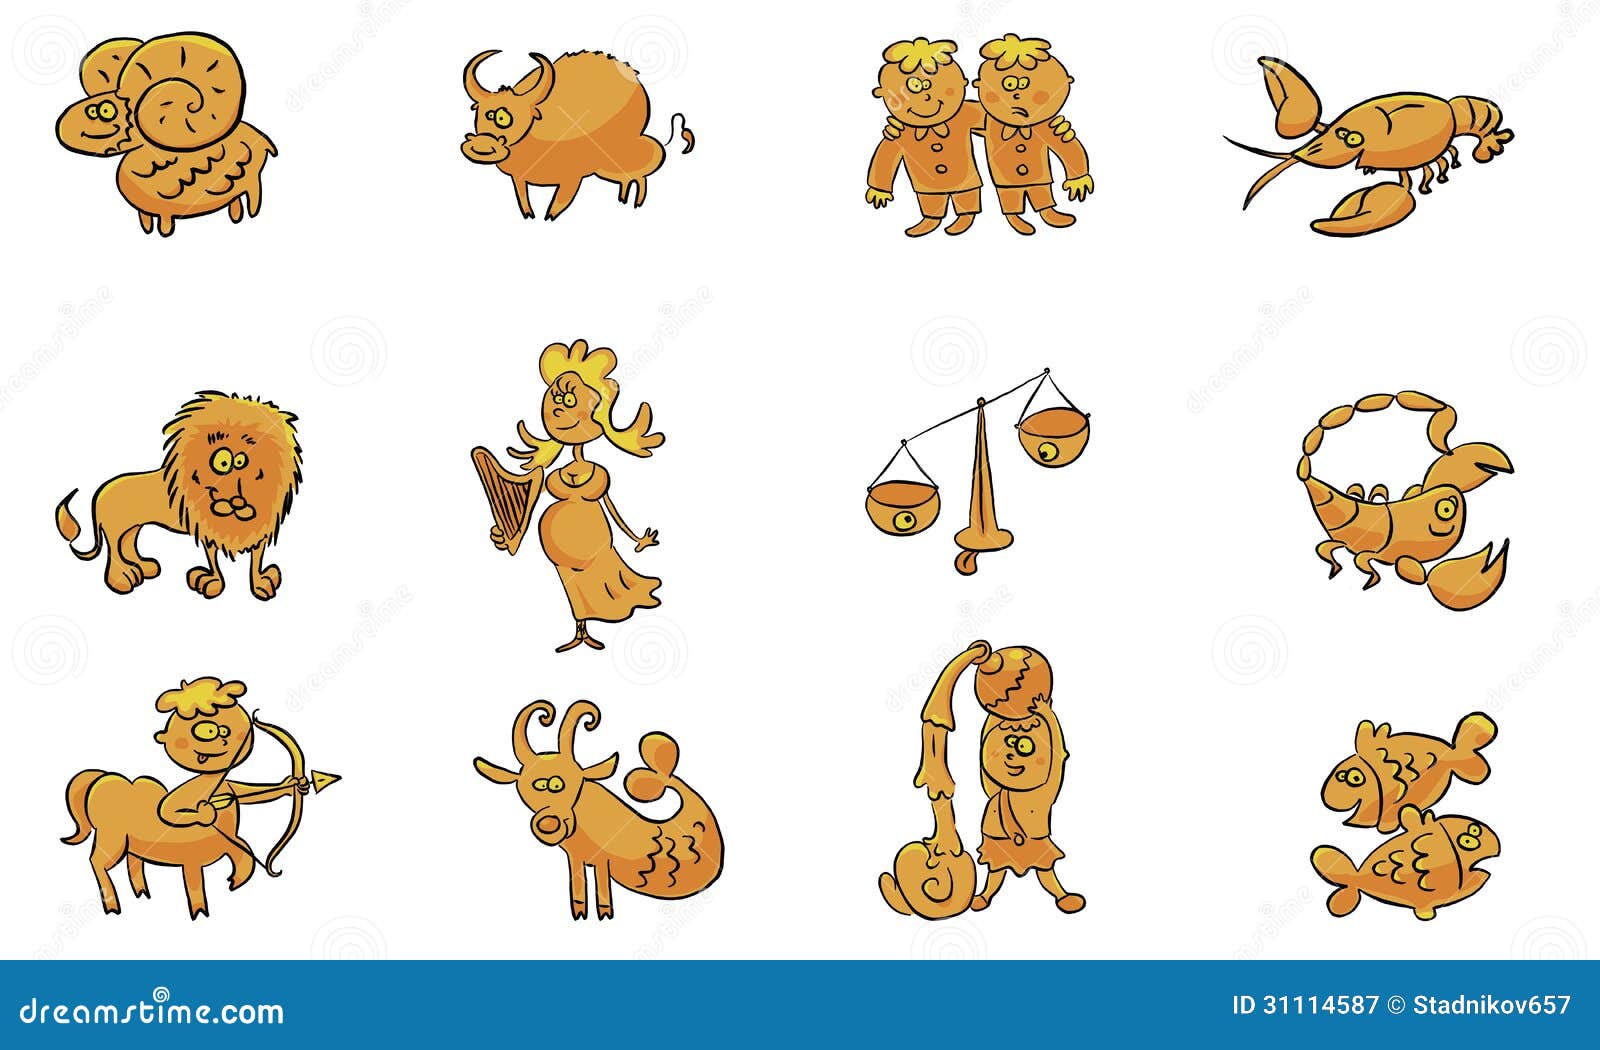 Signs of the zodiac stock illustration. Illustration of 